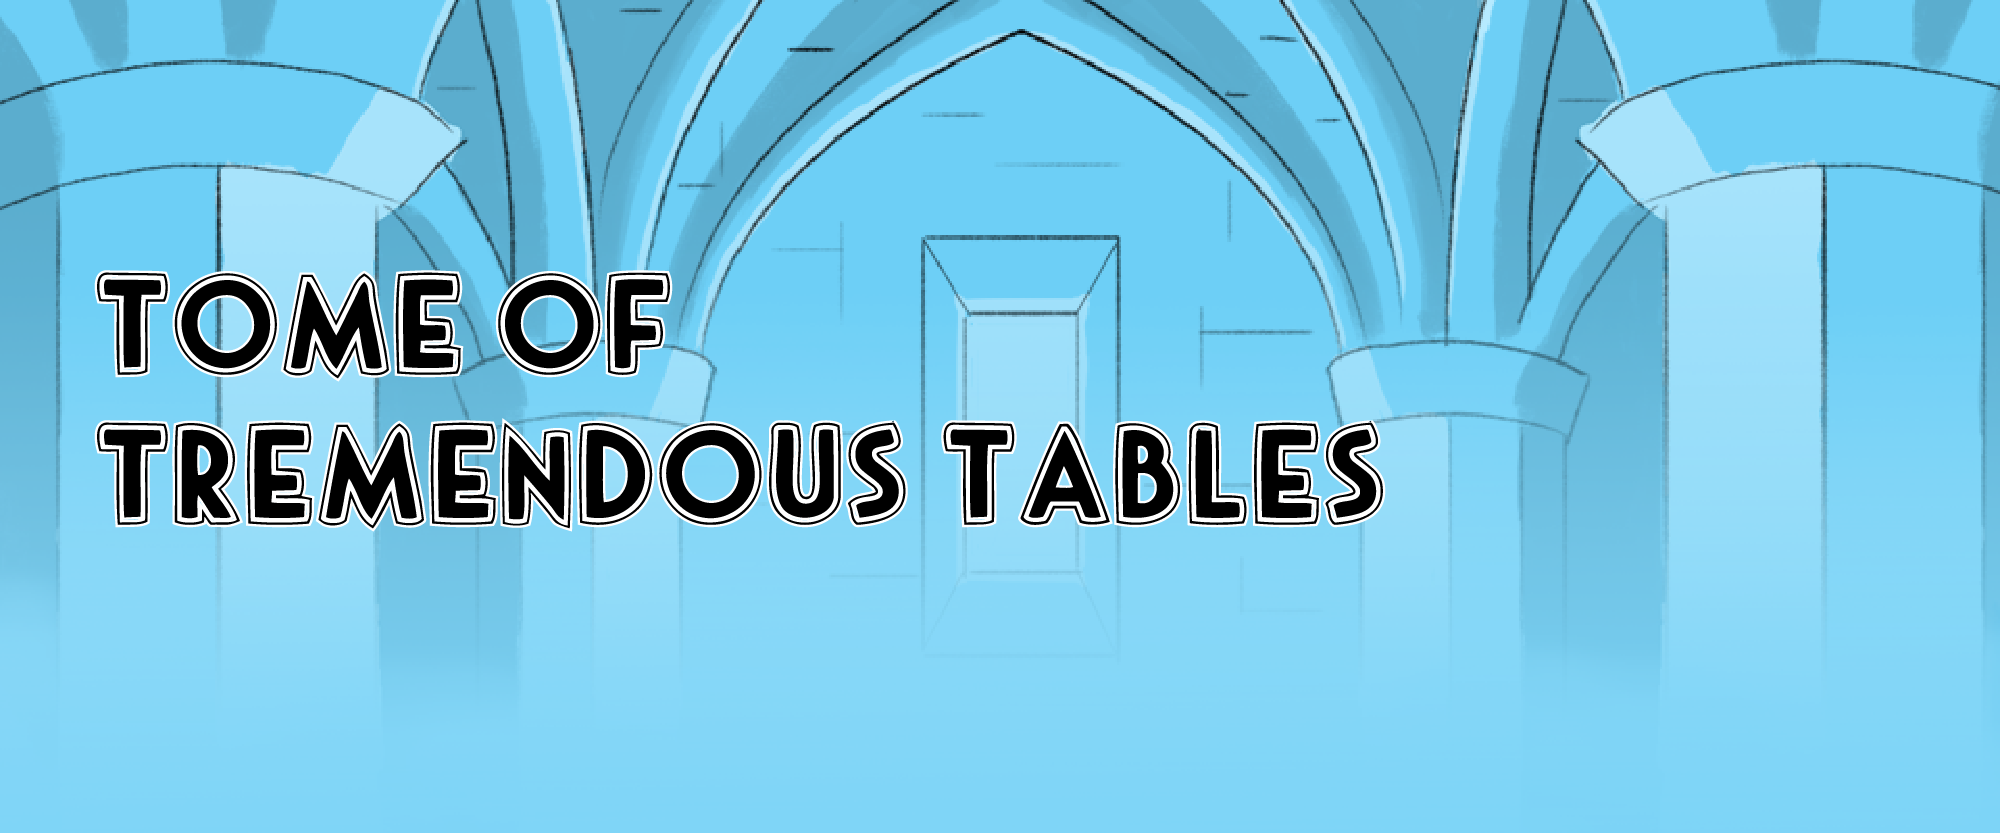 Tome of Tremendous Tables